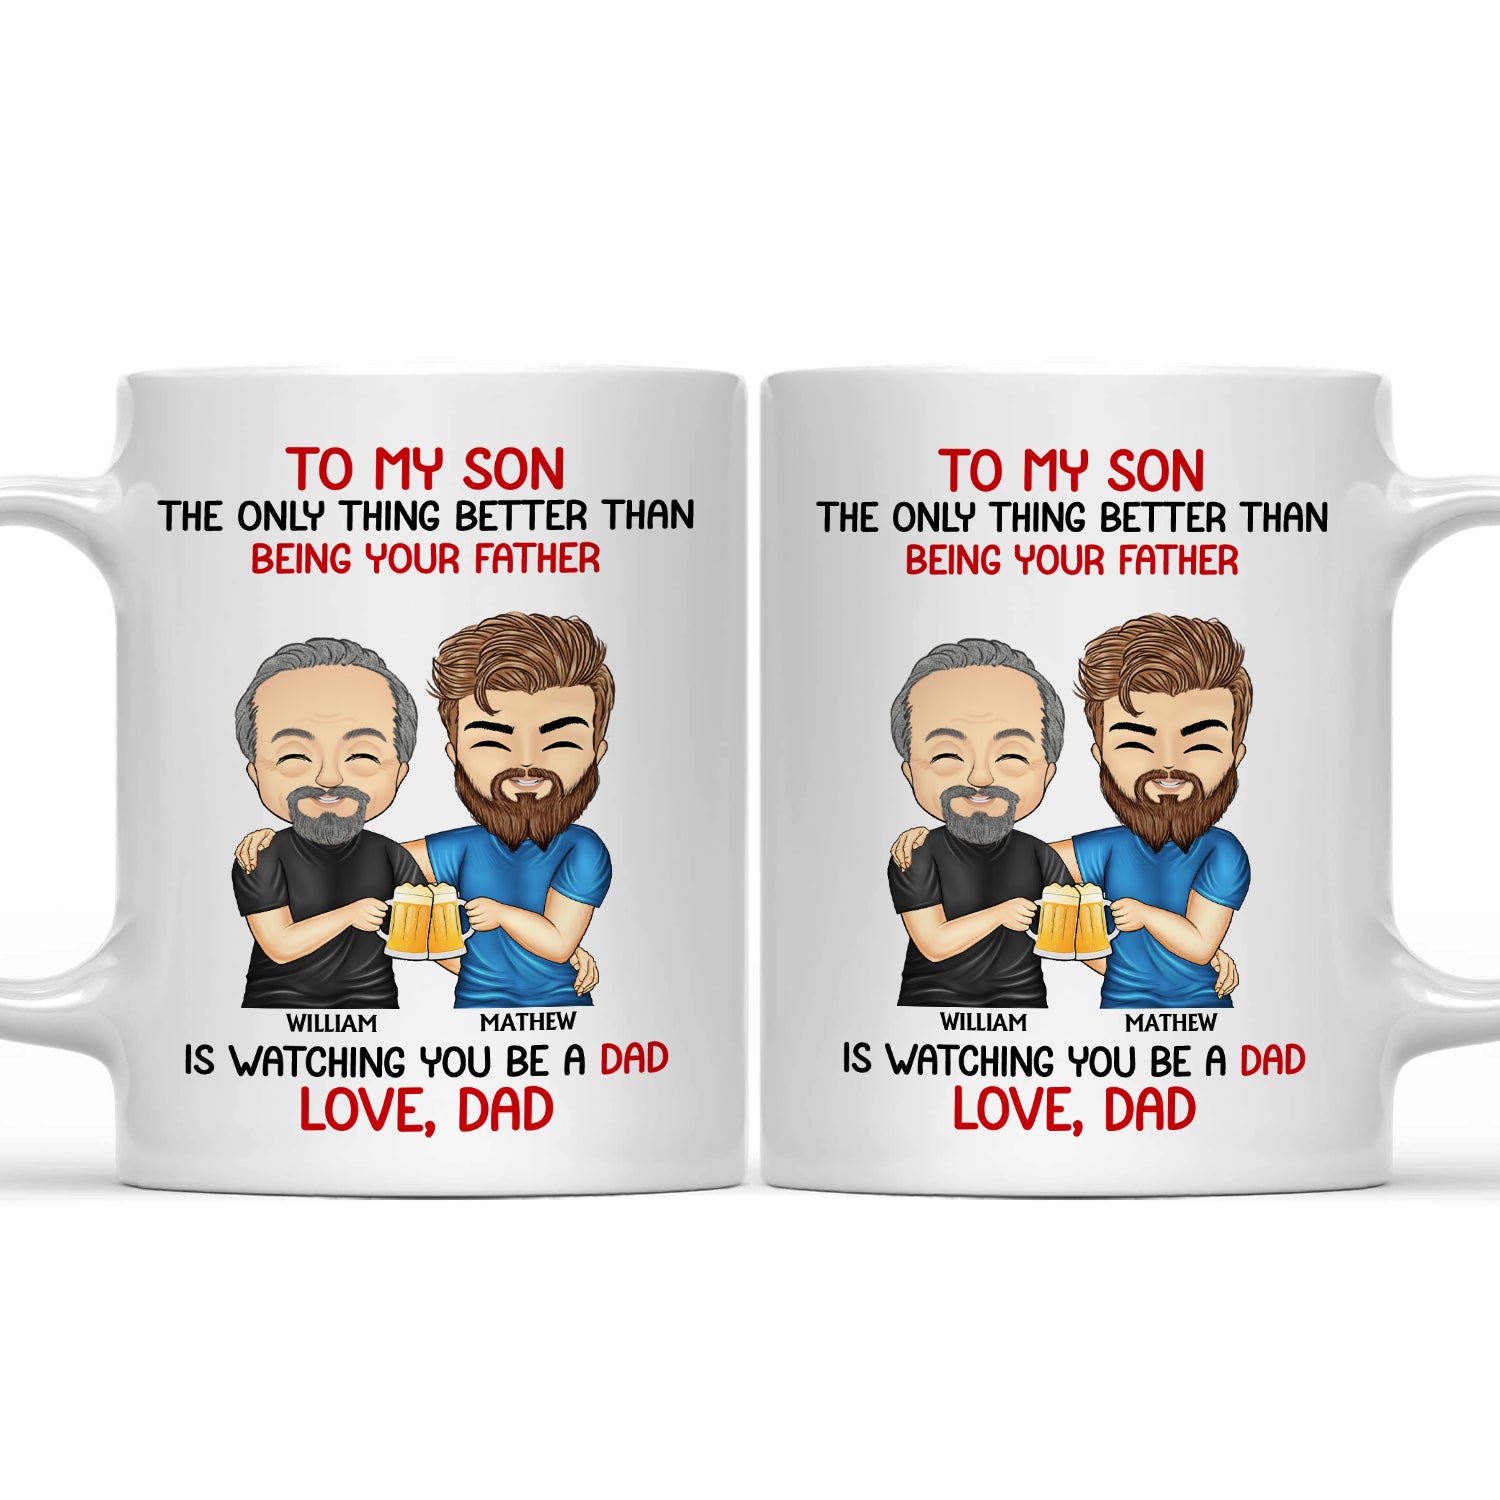 Better Than Being Your Father - Gift For Son - Personalized Mug